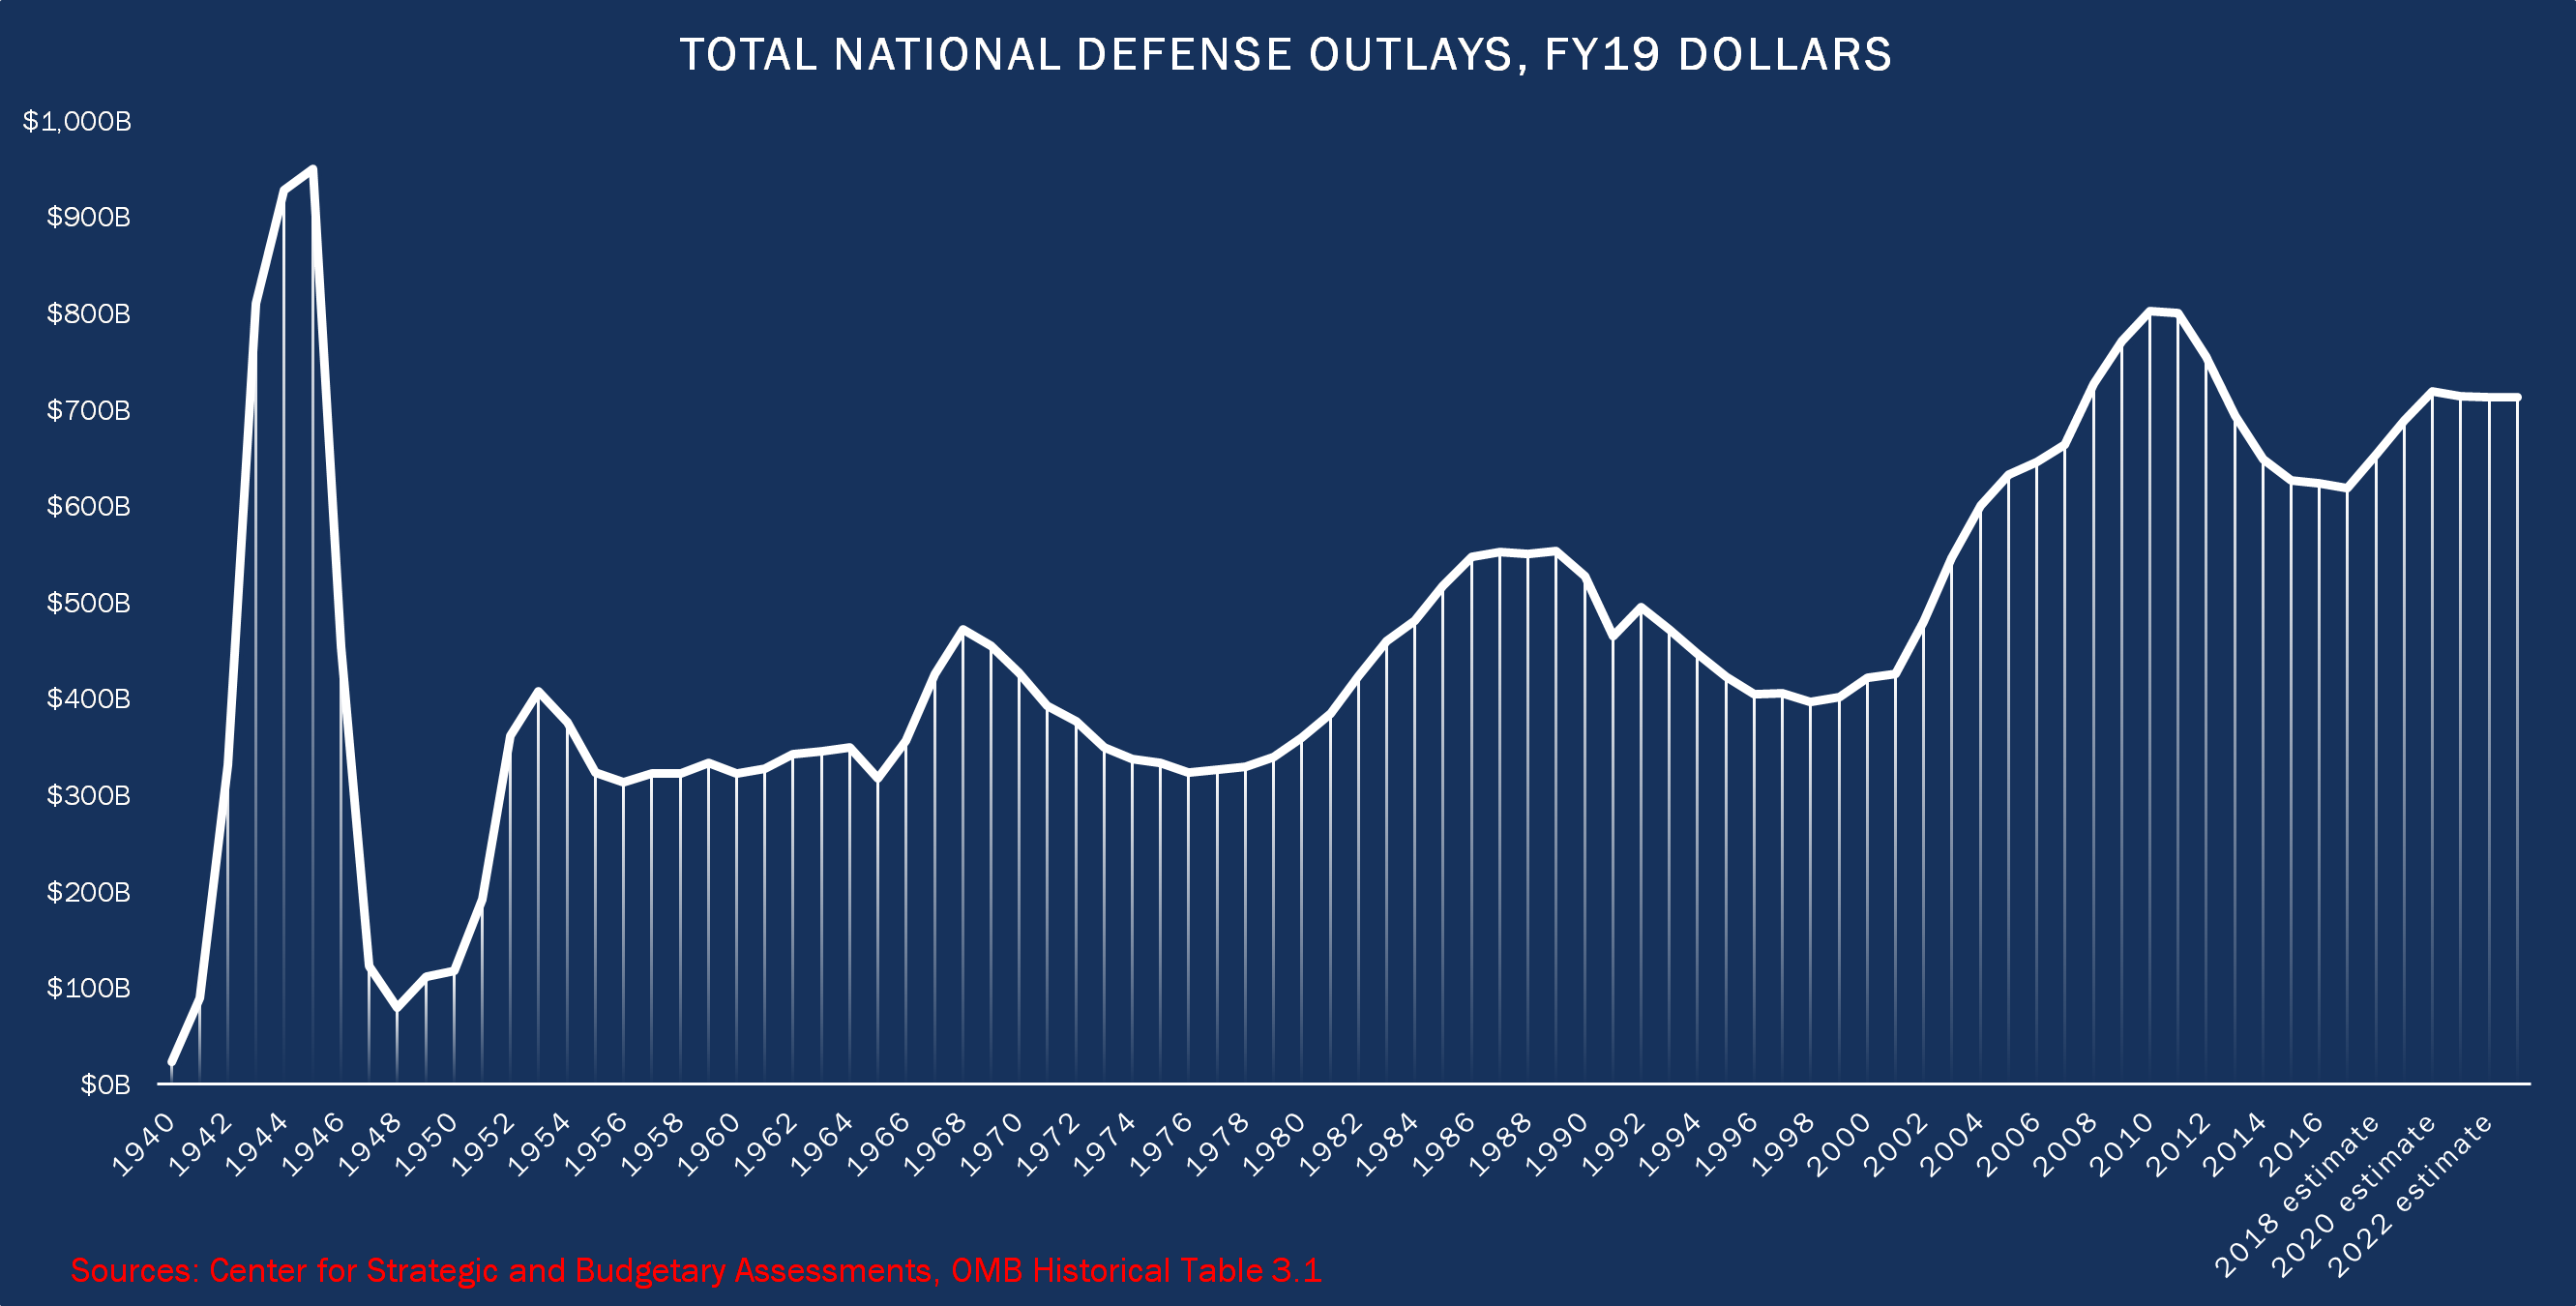 us military spending gdp